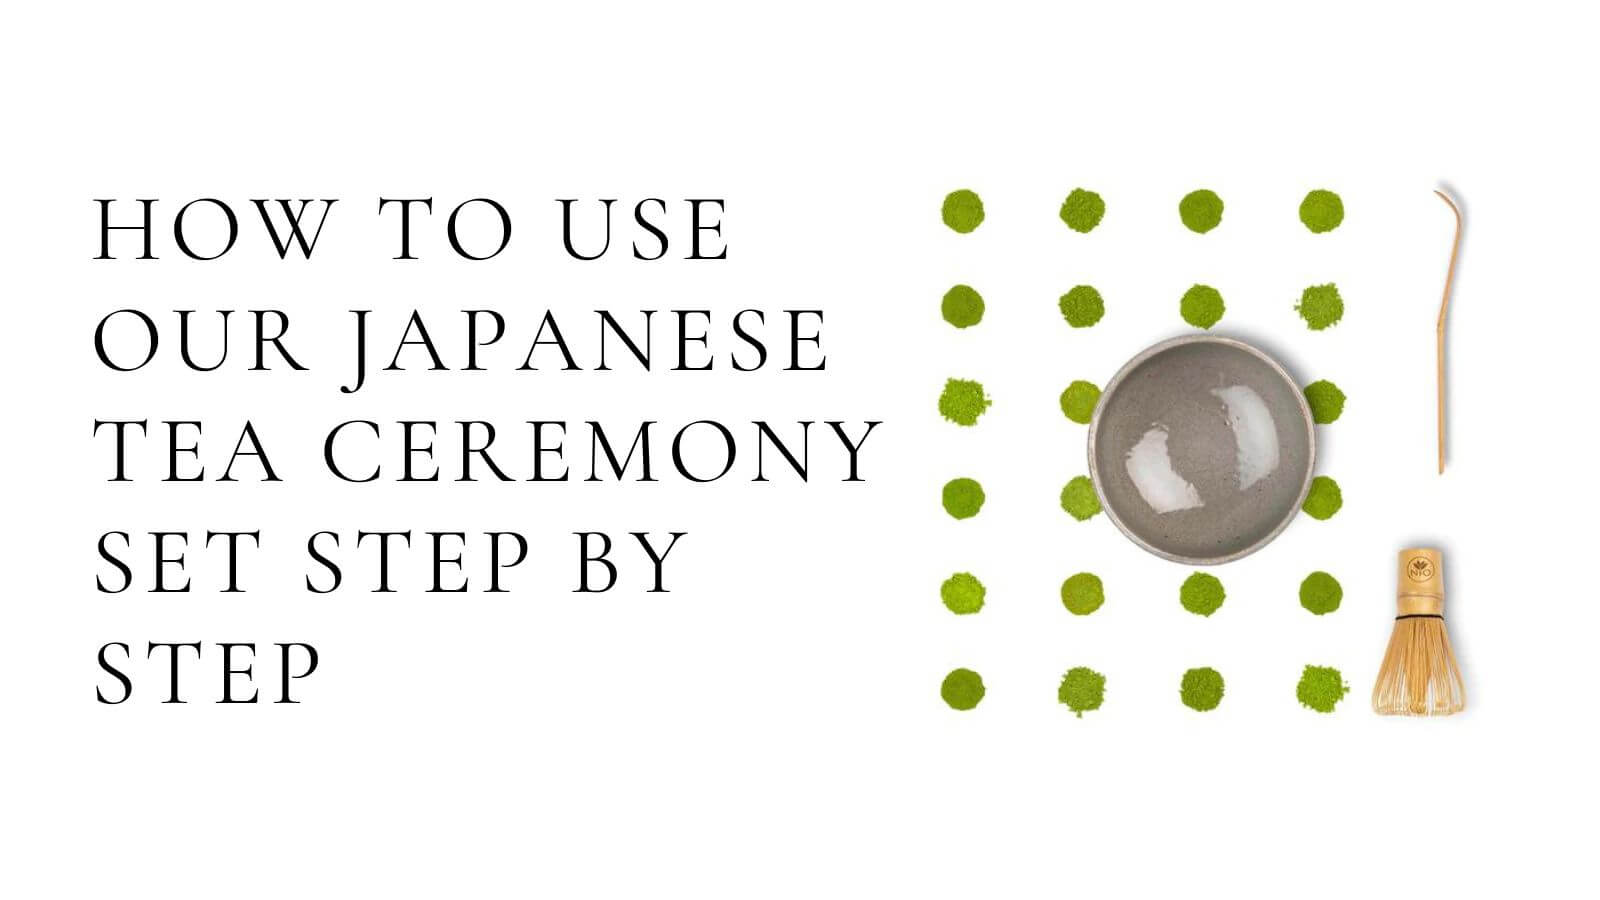 Load video: How to use our japanese tea ceremony set step by step